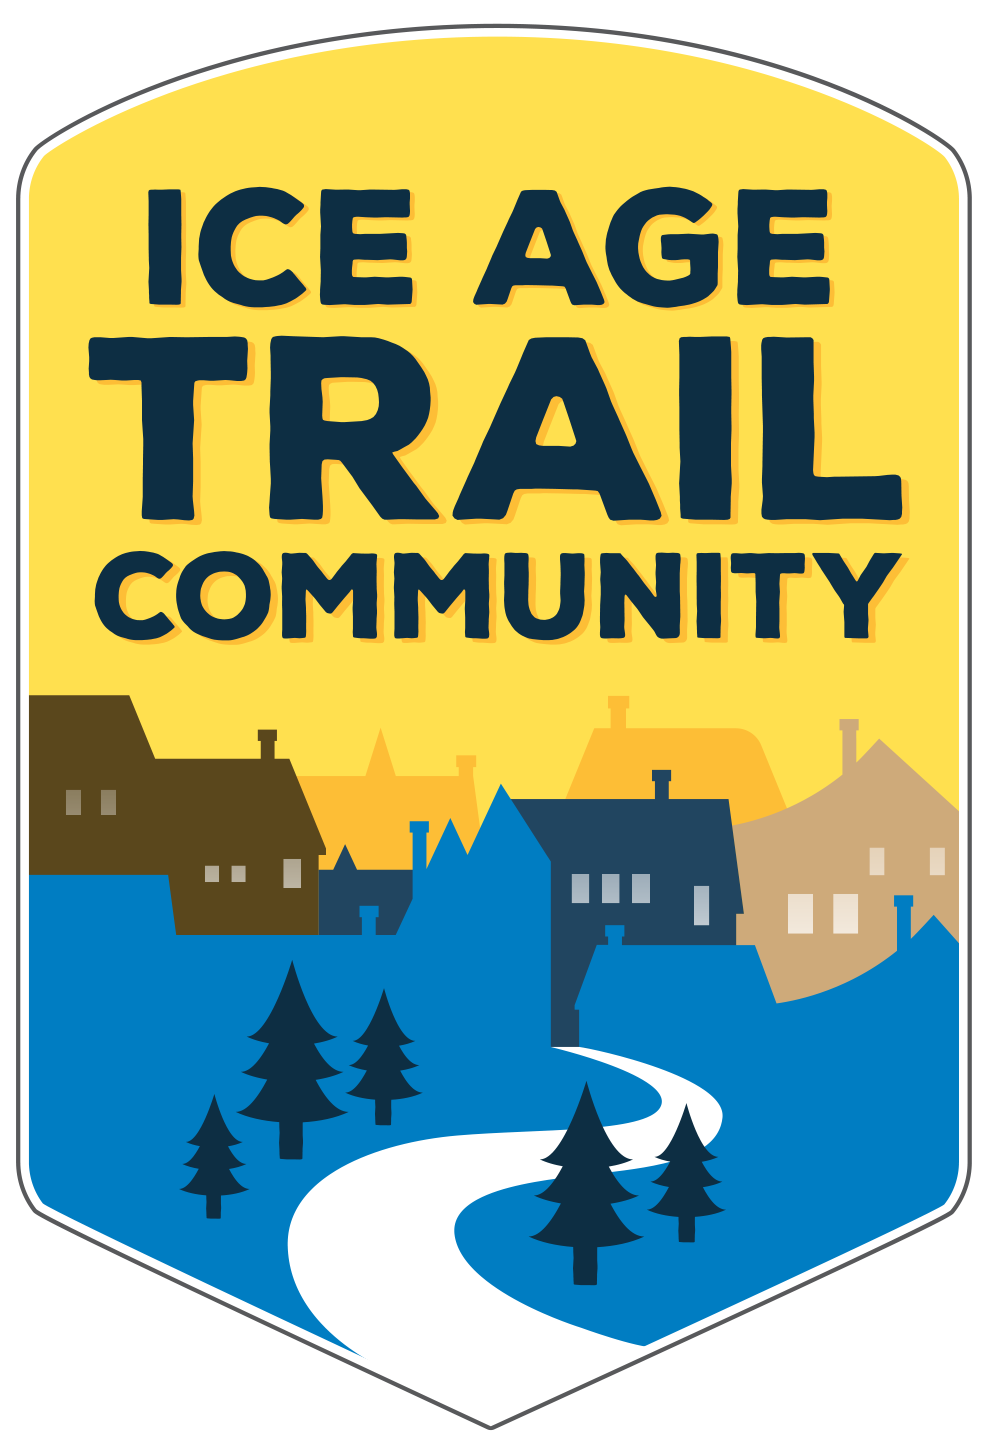 Ice Age Trail Status Is To Be Celebrated